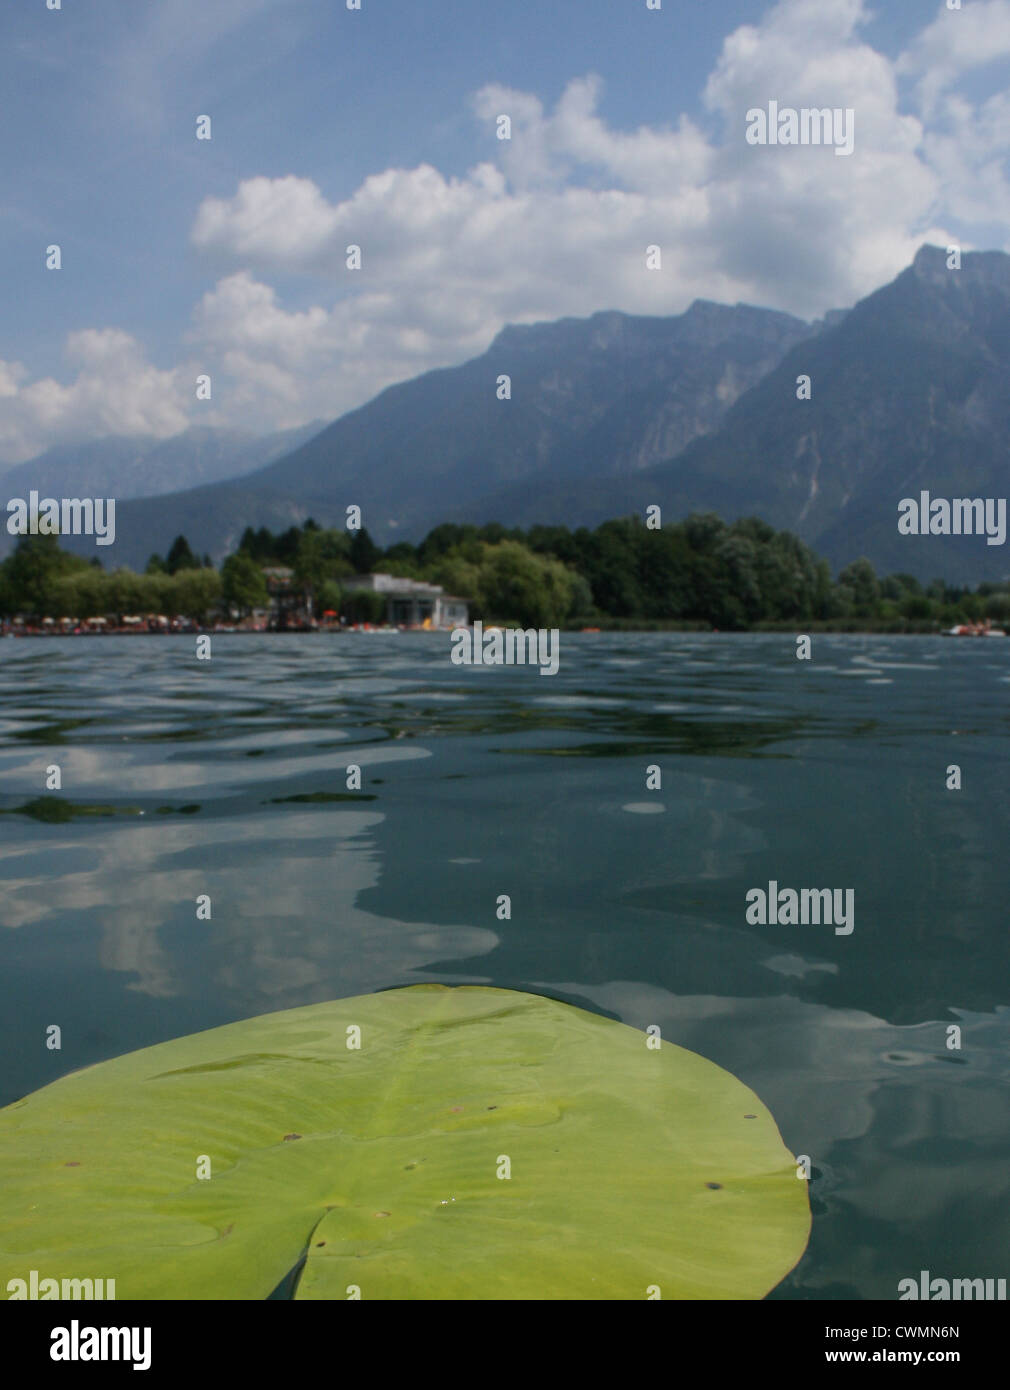 Lily Pad am Levico See am Camping Levico, Trentino, Italien Stockfoto